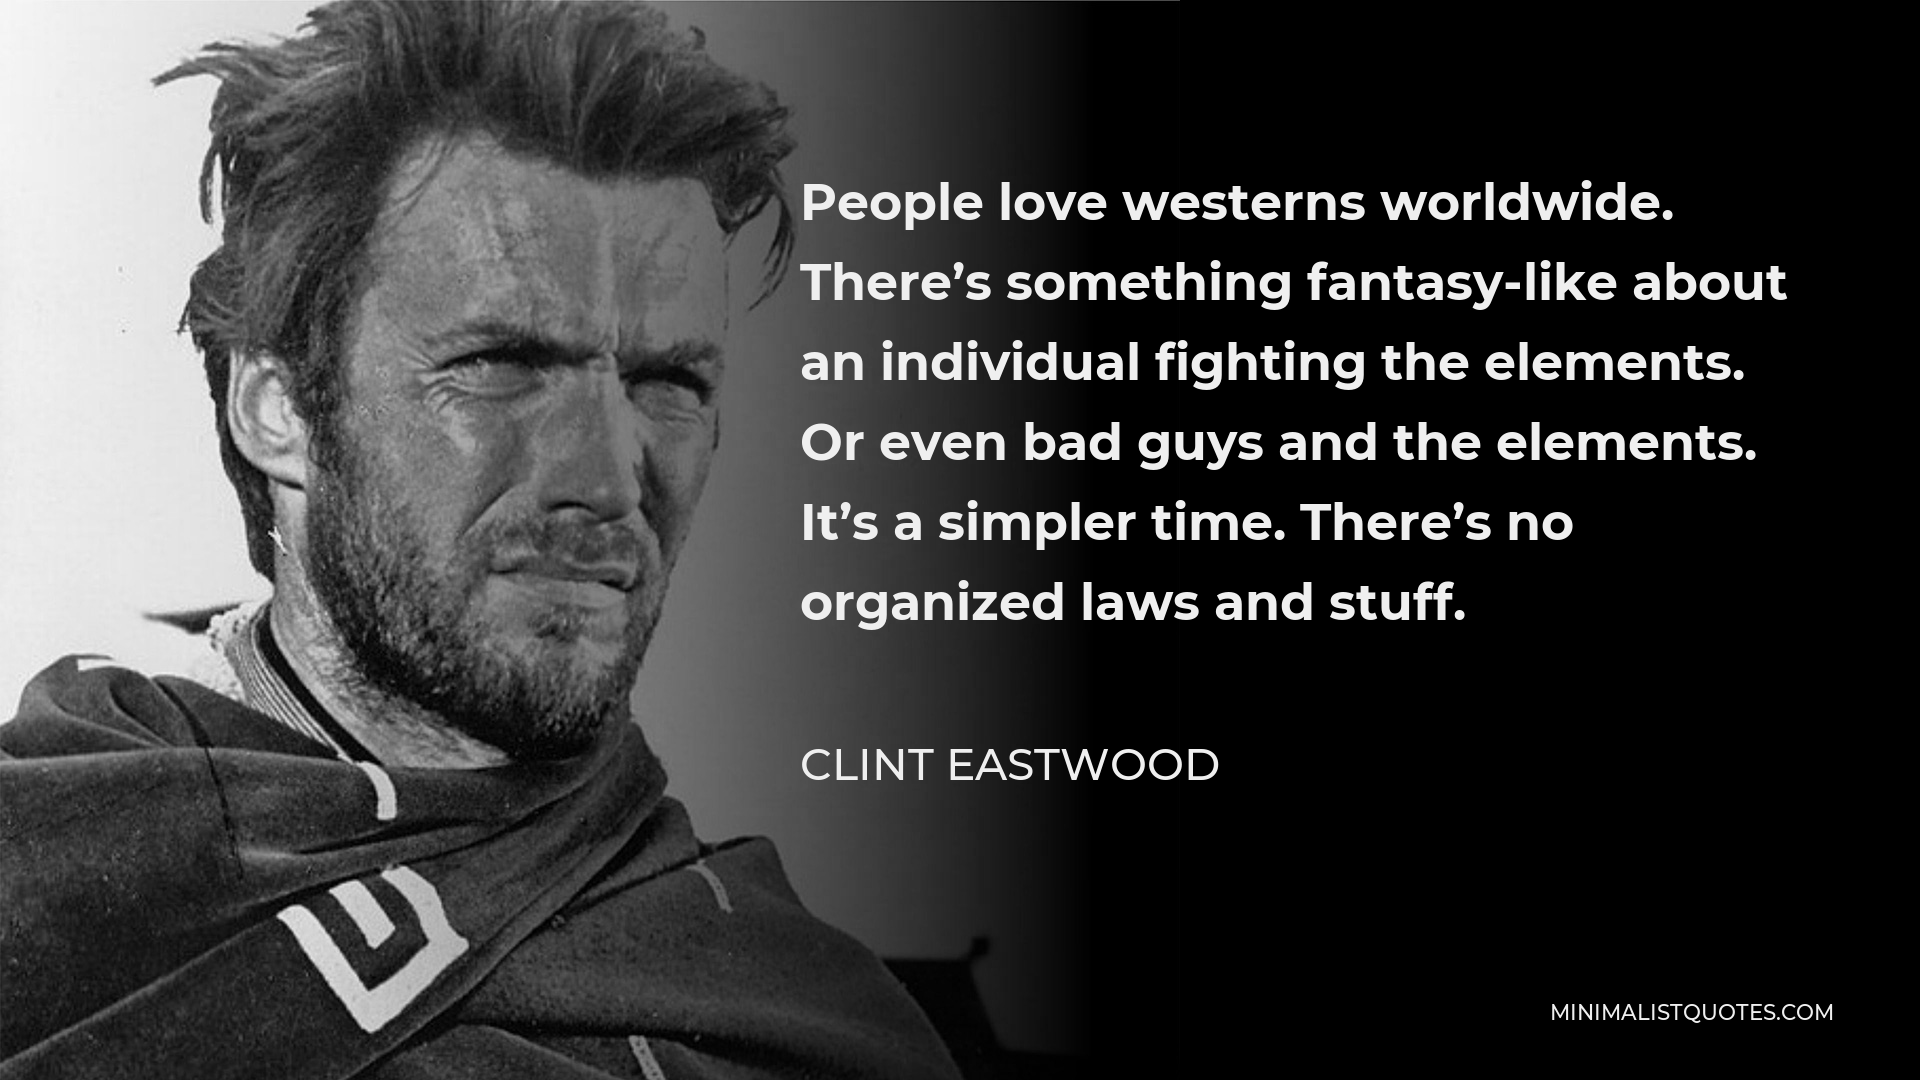 Clint Eastwood Quote - People love westerns worldwide. There’s something fantasy-like about an individual fighting the elements. Or even bad guys and the elements. It’s a simpler time. There’s no organized laws and stuff.